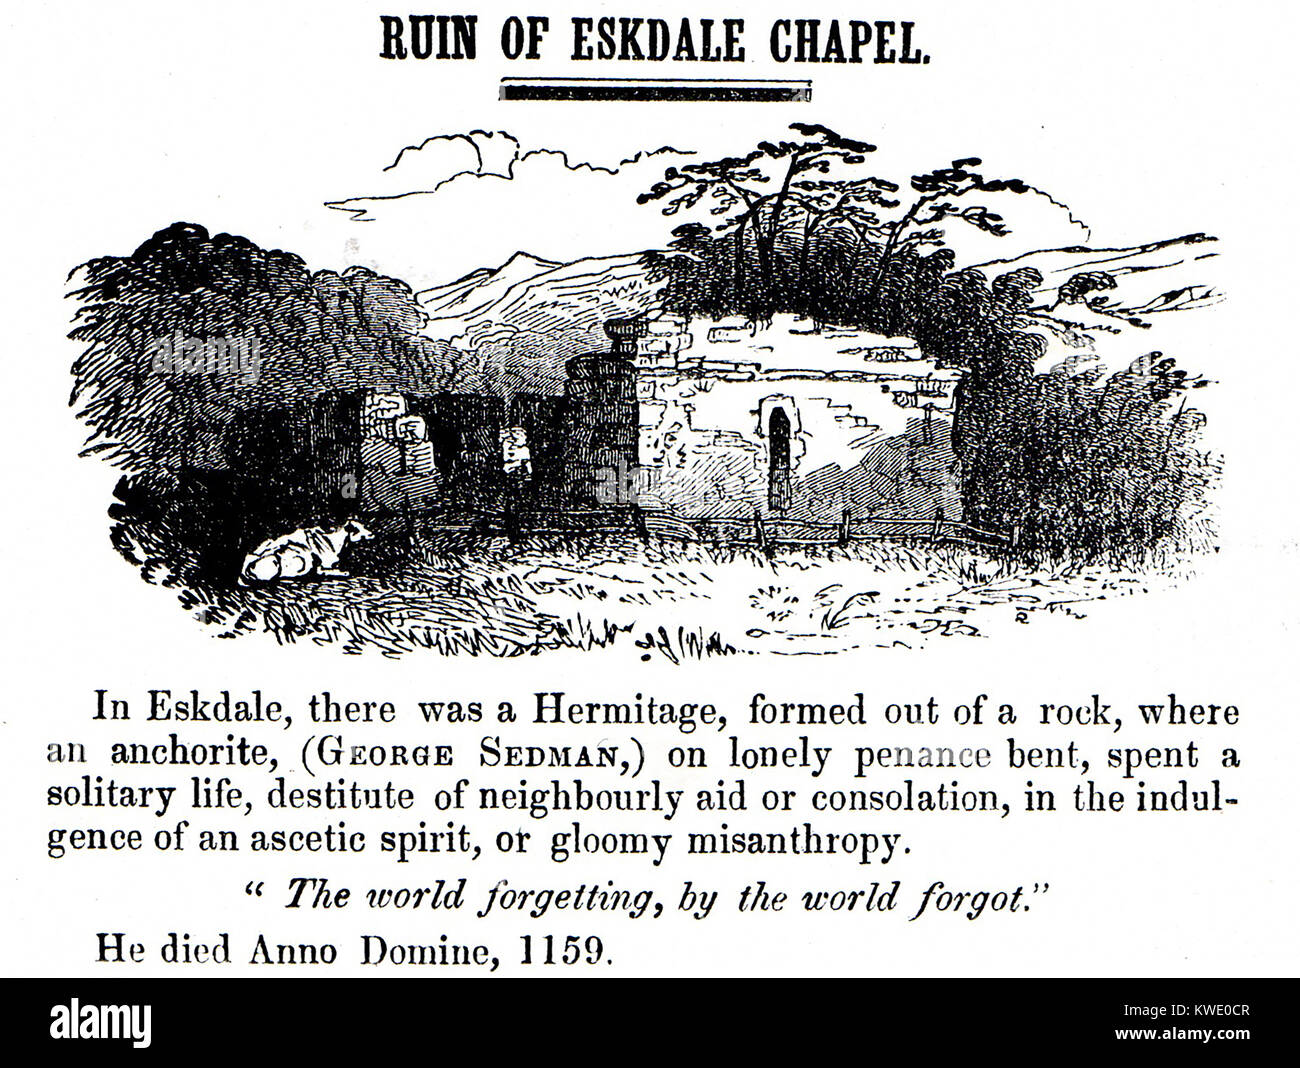 Eskdale Chapel  Hermitage, in  Eskdale between  Sleights and Aislaby villages,. Whitby, North Yorkshire, England. from an old printed engraving - Linked by some to the Whitby Horngarth or Penny Hedge annual ceremony via (Caedmon - Cedman -  Sedman name) and Whitby Abbey - From a Victorian engraving Stock Photo